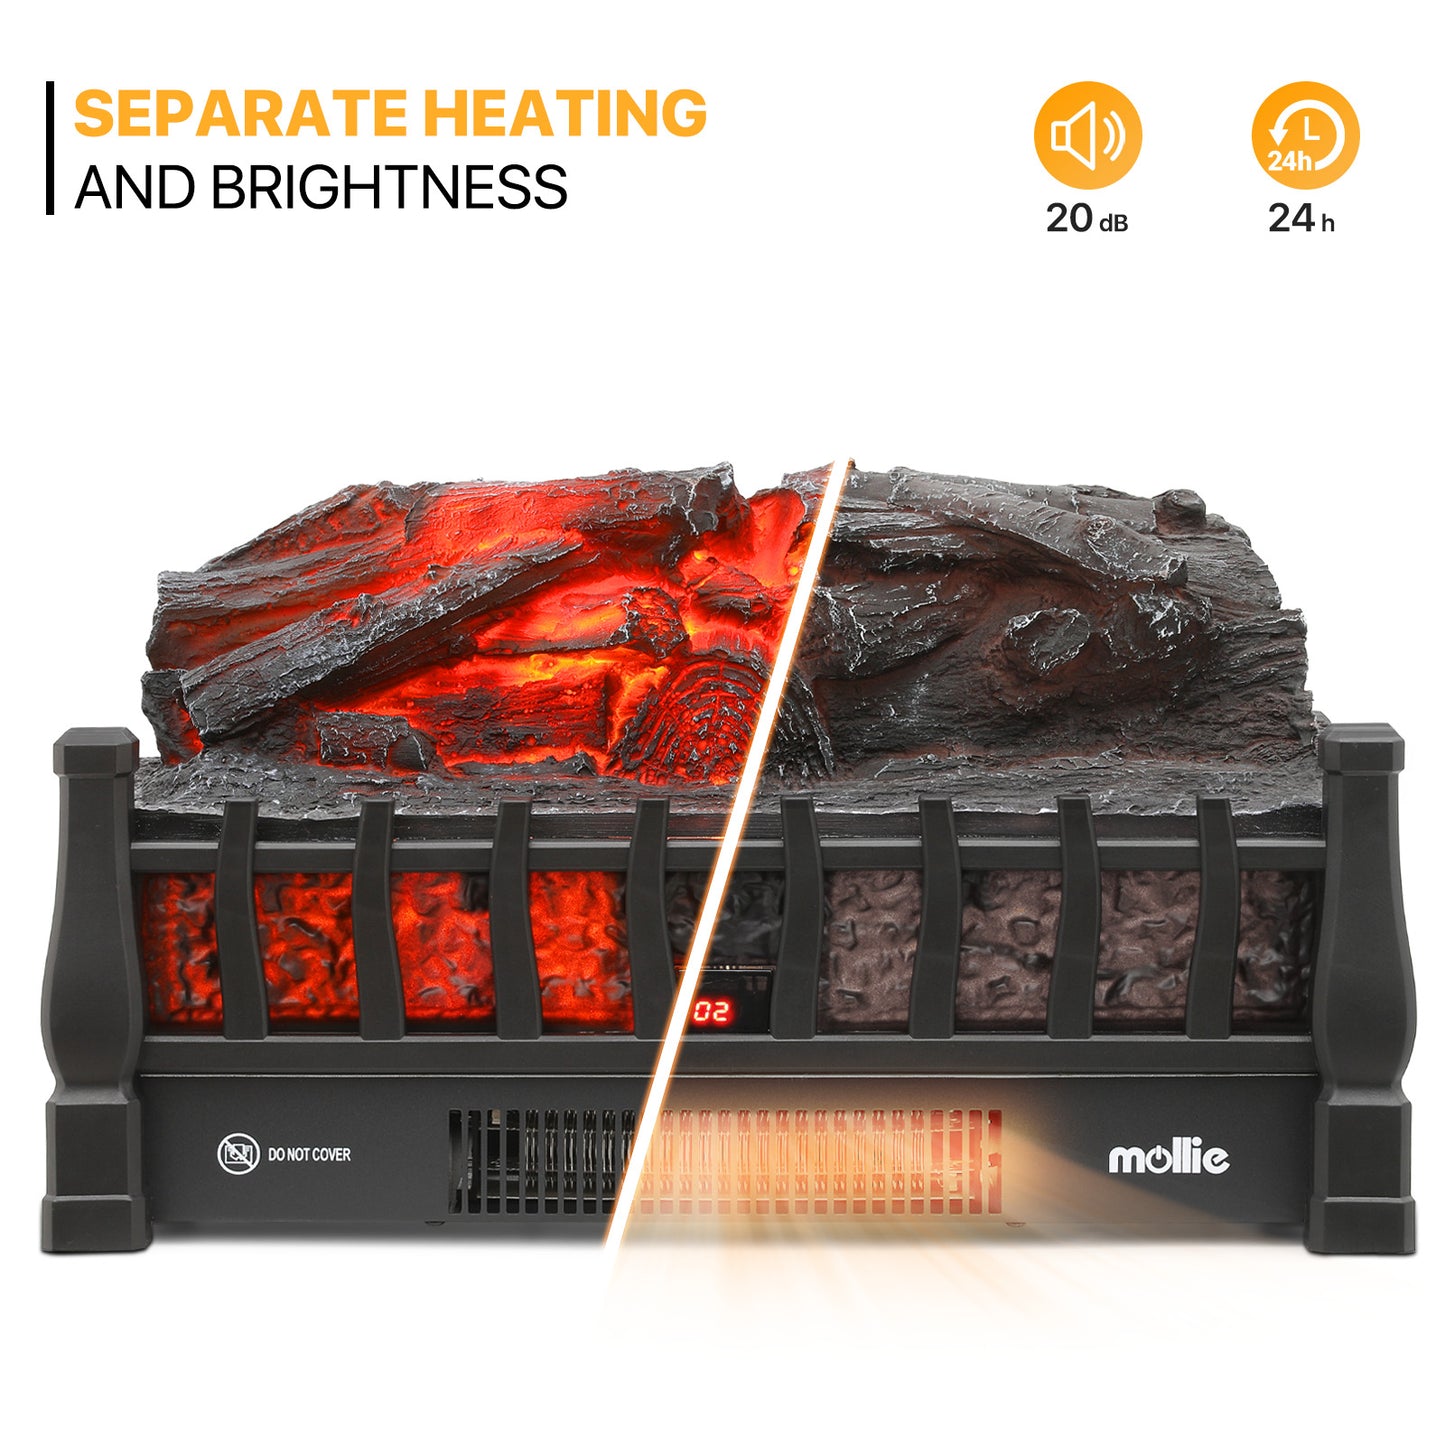 Electric Fireplace - 1500W Space Heater - Logs and Inserts - 5 Level Flame Brightness - with Remote